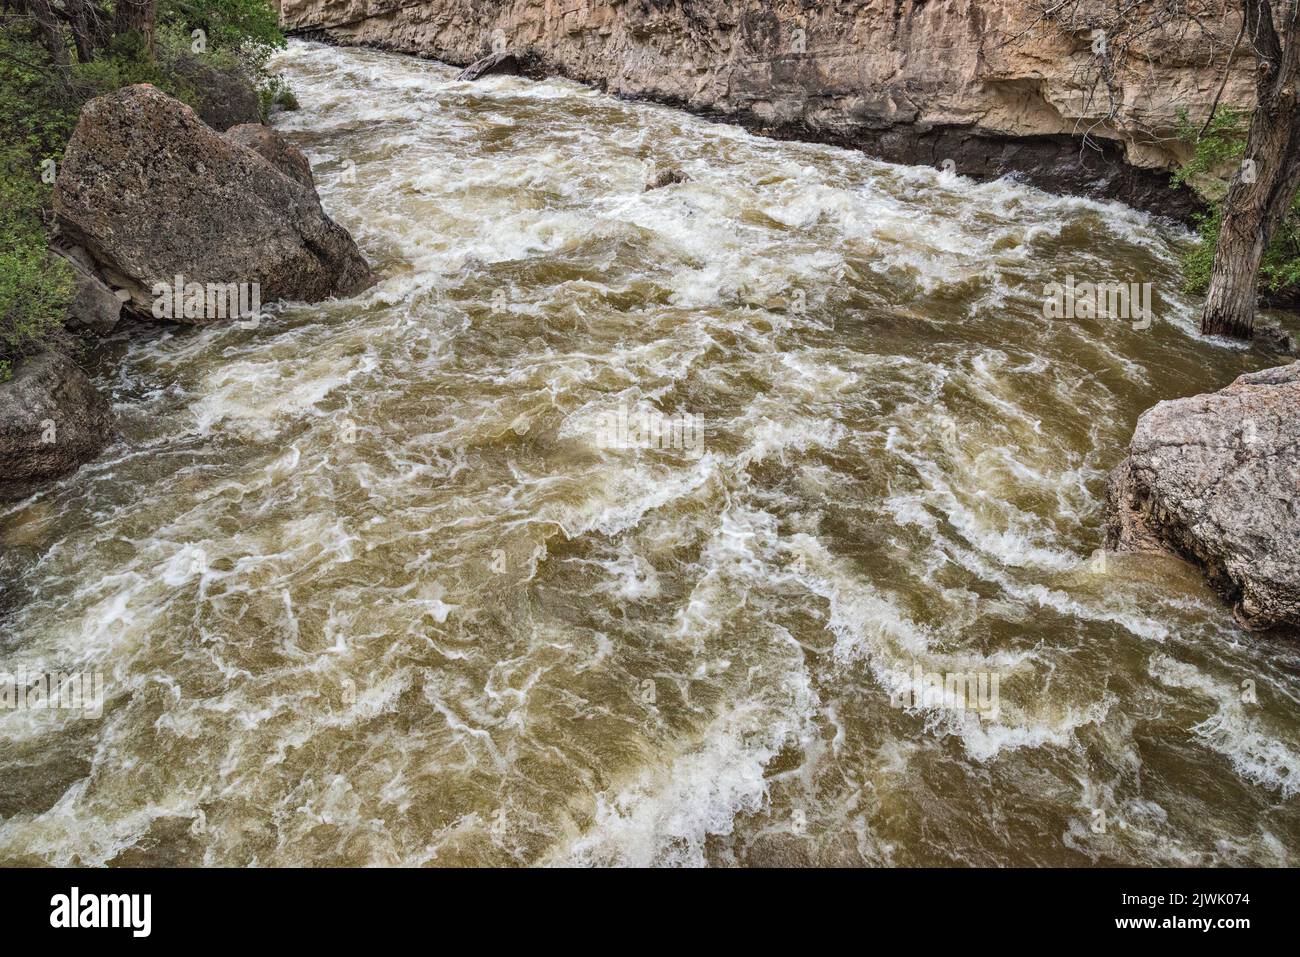 Shell Creek rapids, Shell Canyon, Bighorn Mountains, Bighorn National Forest, Wyoming, USA Stock Photo